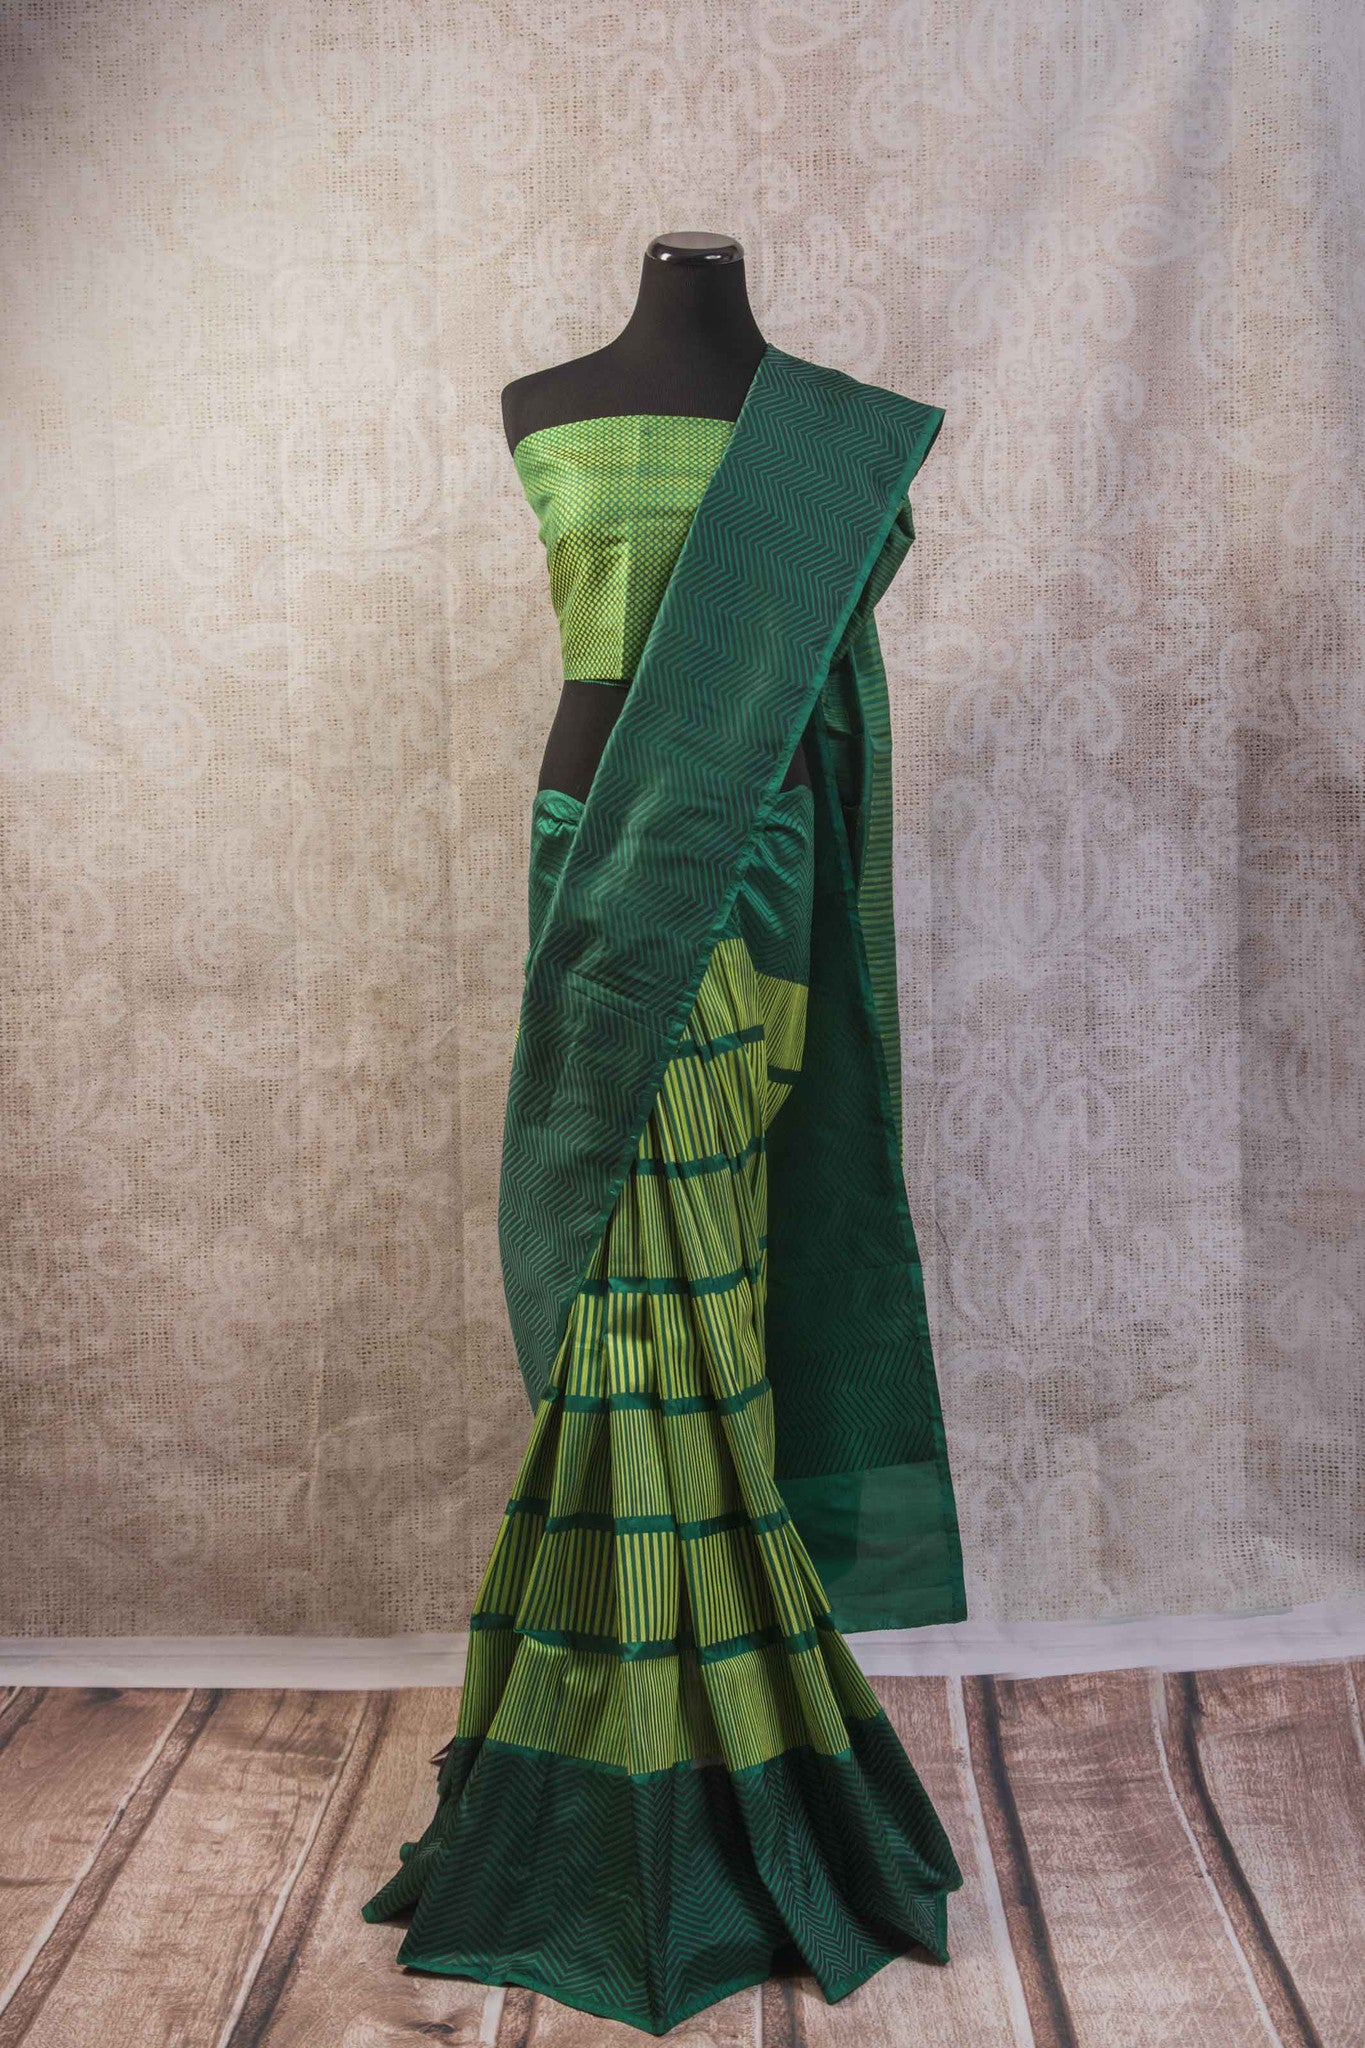 90b256 Multi green Banarasi silk saree with zig zag stripes & satin black pallu. The simple sari is available at our Indian clothing store in USA, Pure Elegance. This one is perfect for parties, get-togethers and functions!